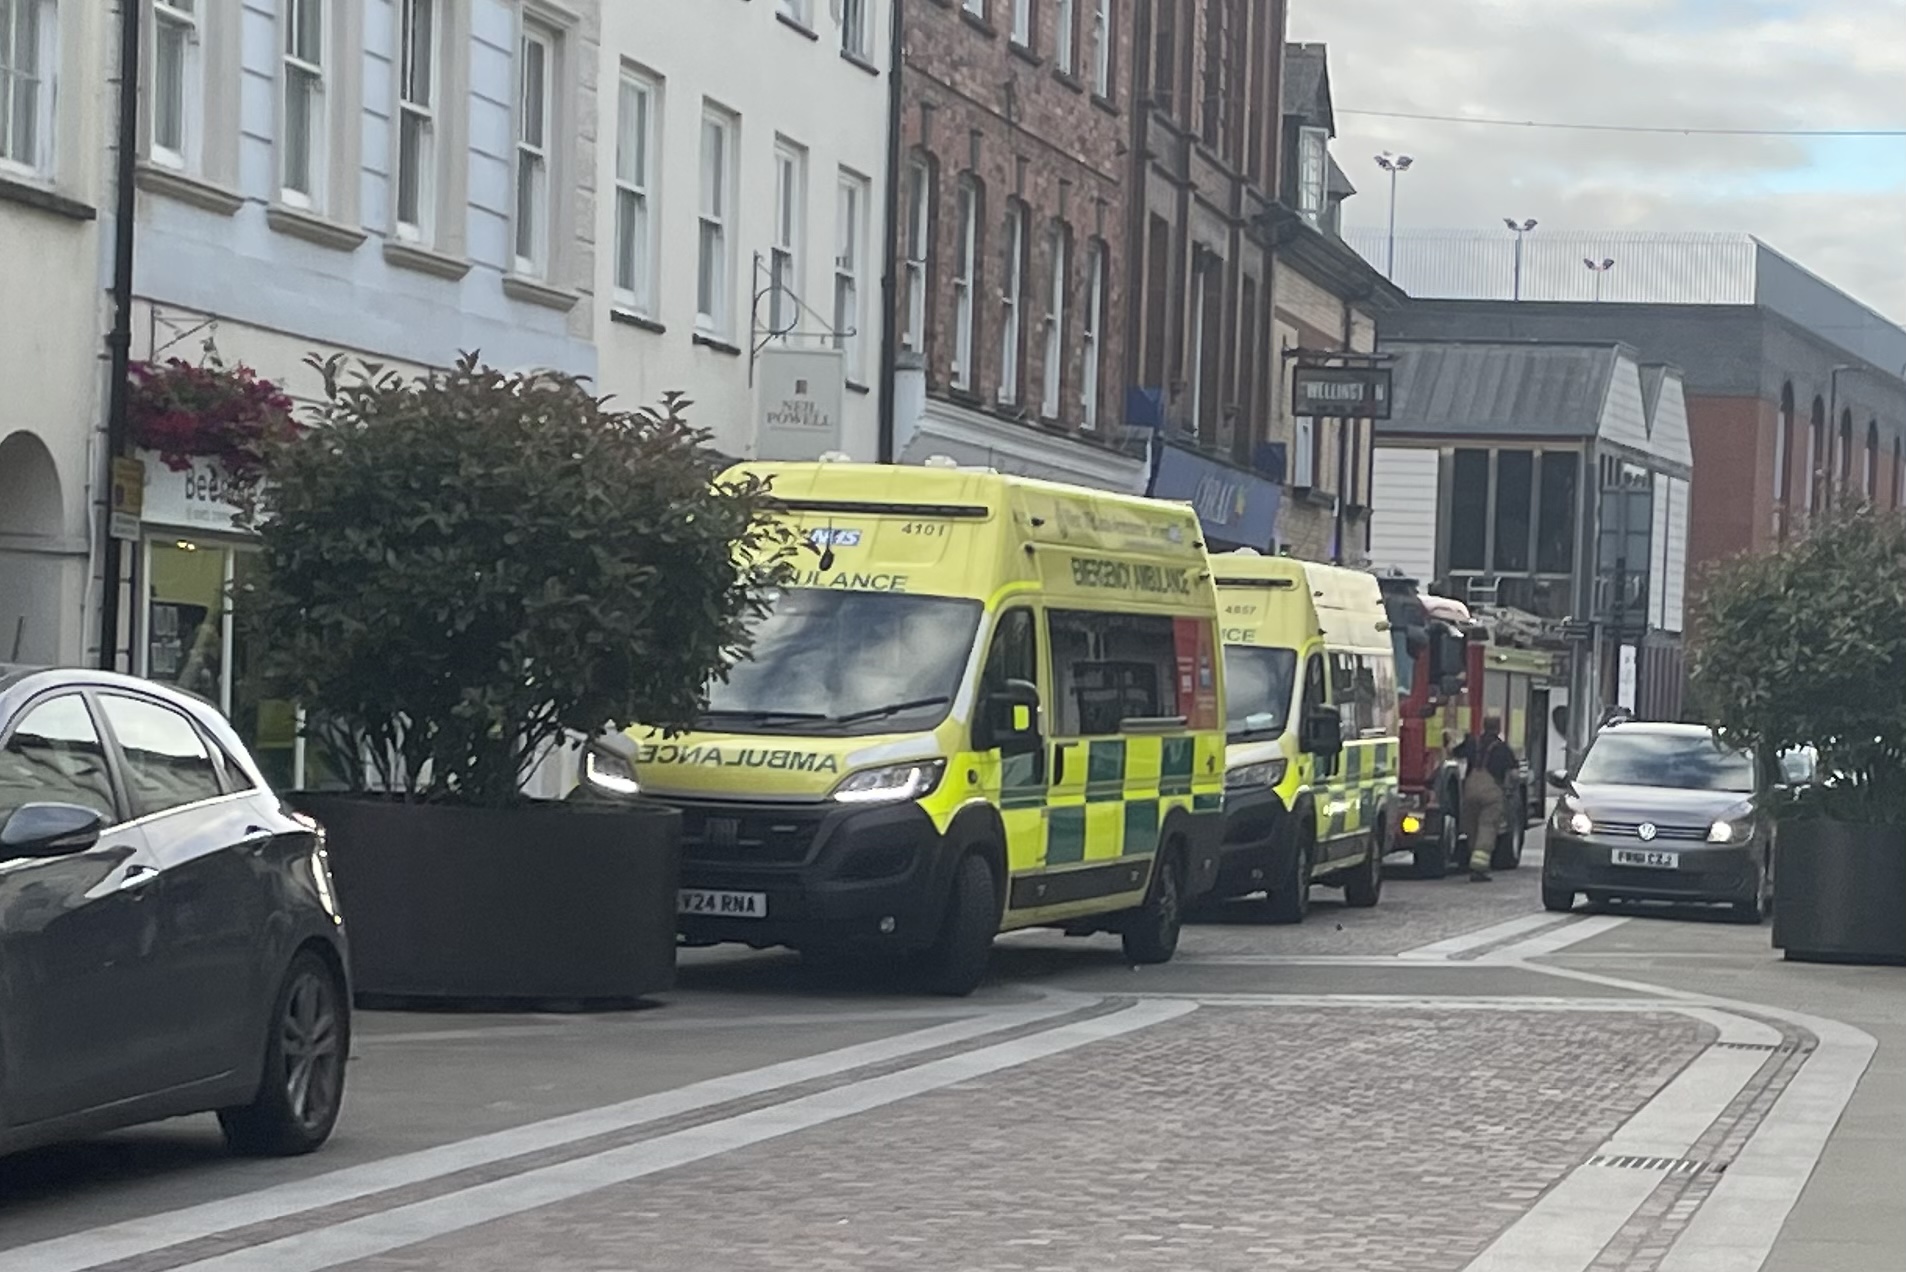 NEWS | Emergency services responding to an incident on Widemarsh Street in Hereford this evening